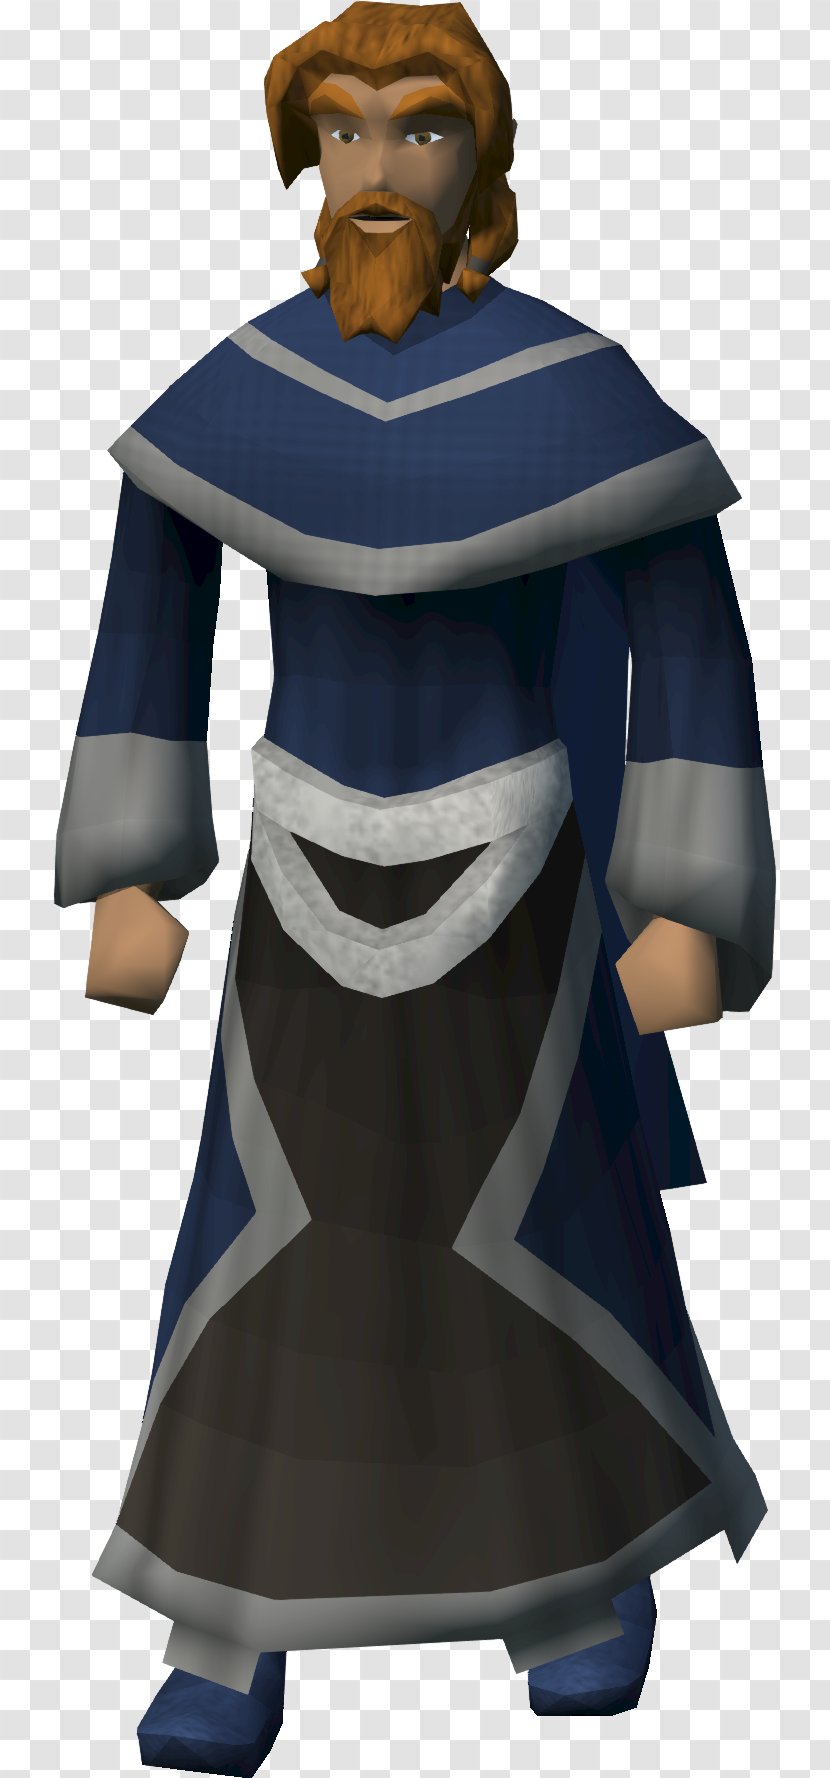 RuneScape Robe Wise Old Man Magician Transparent PNG